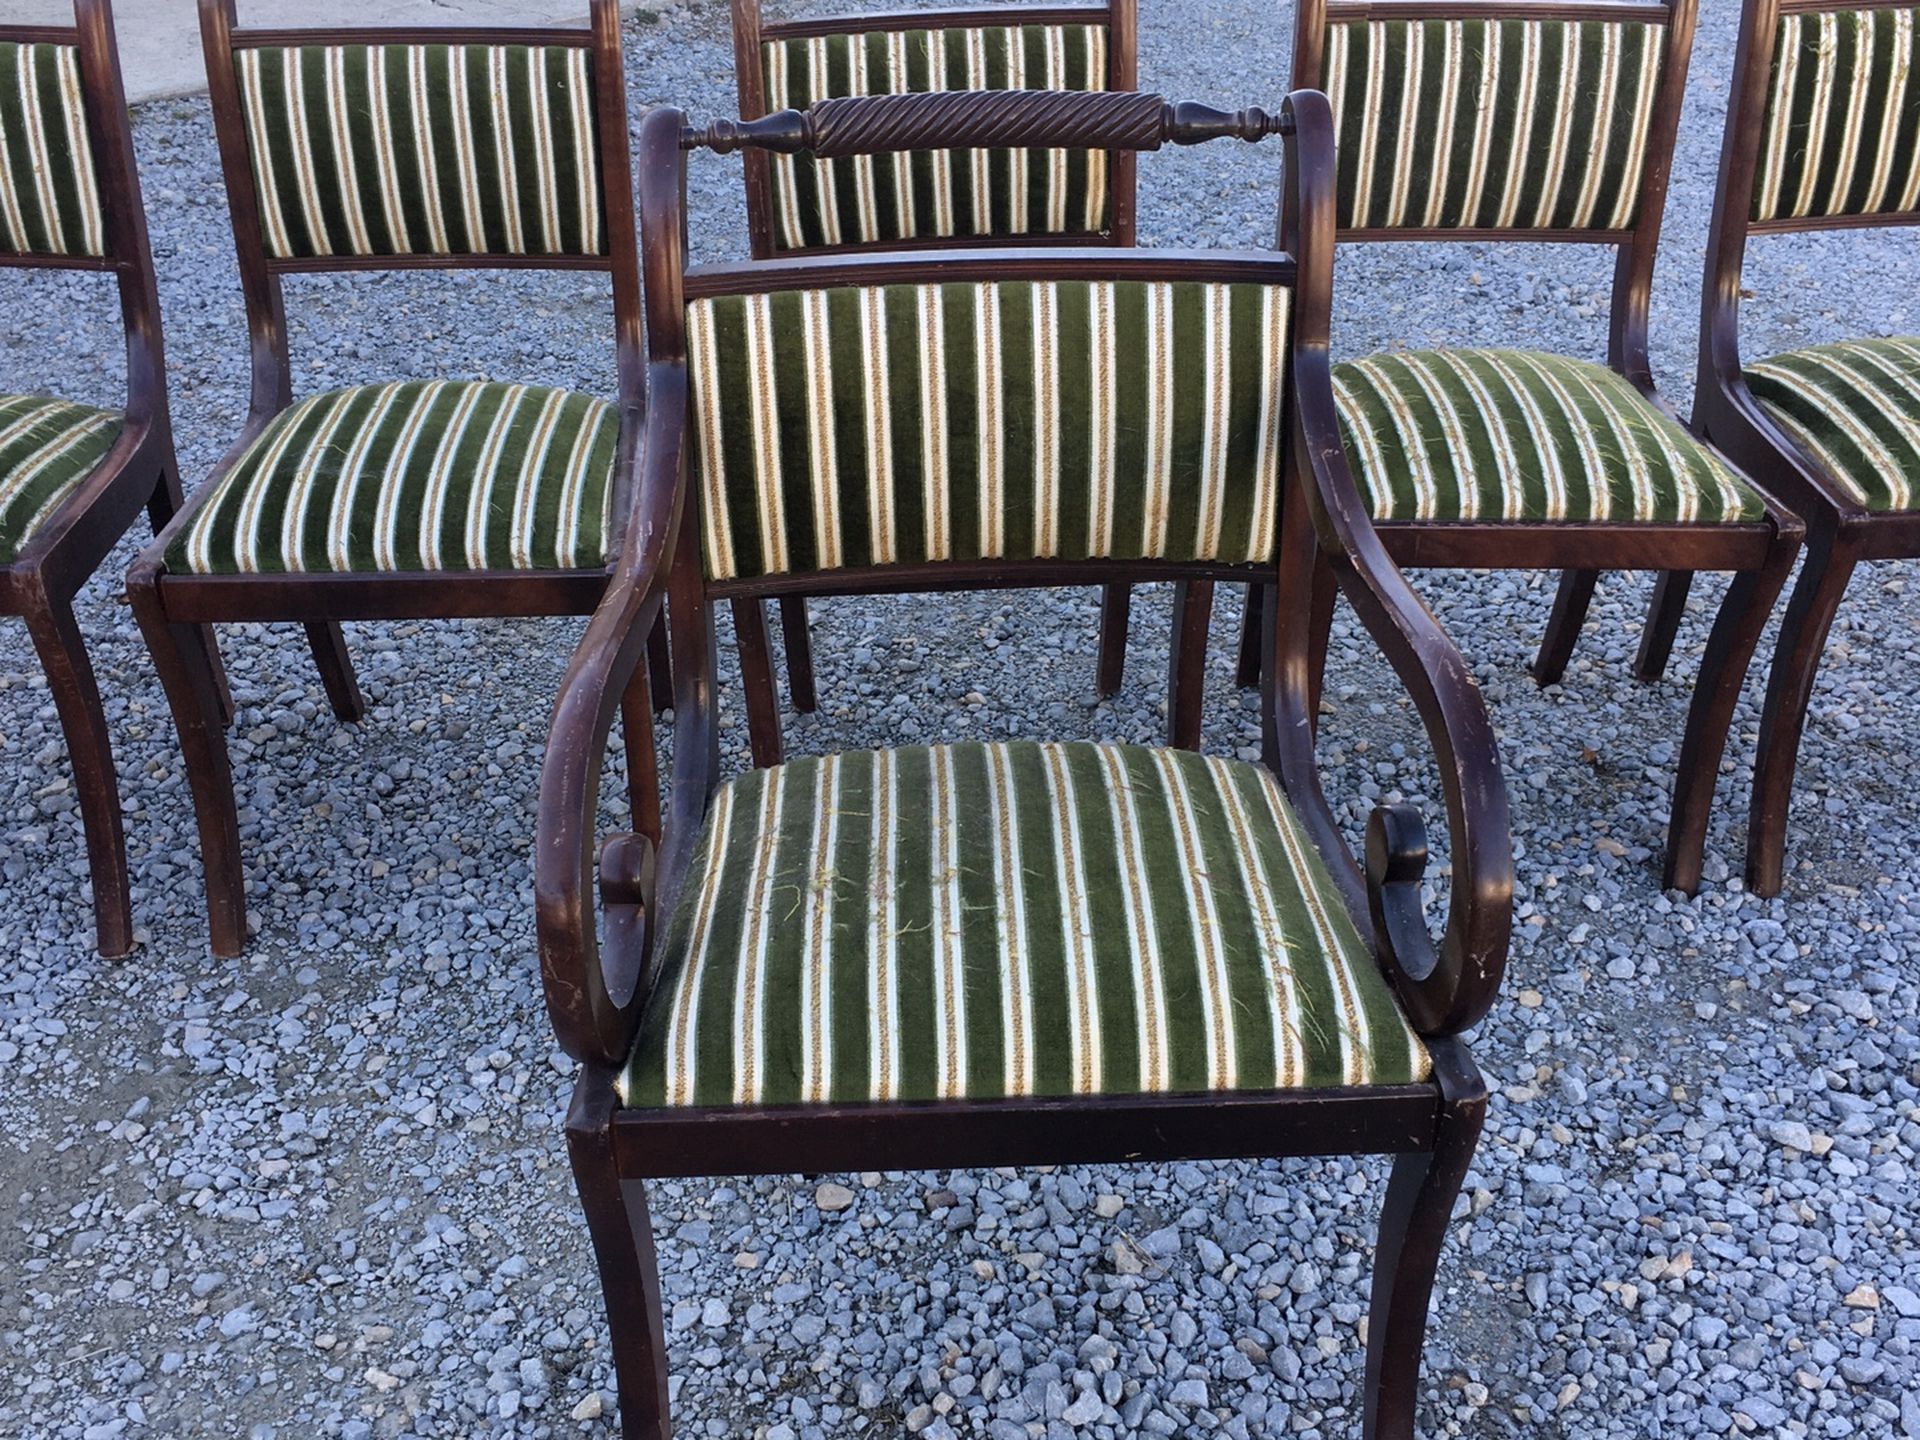 Six vintage chairs